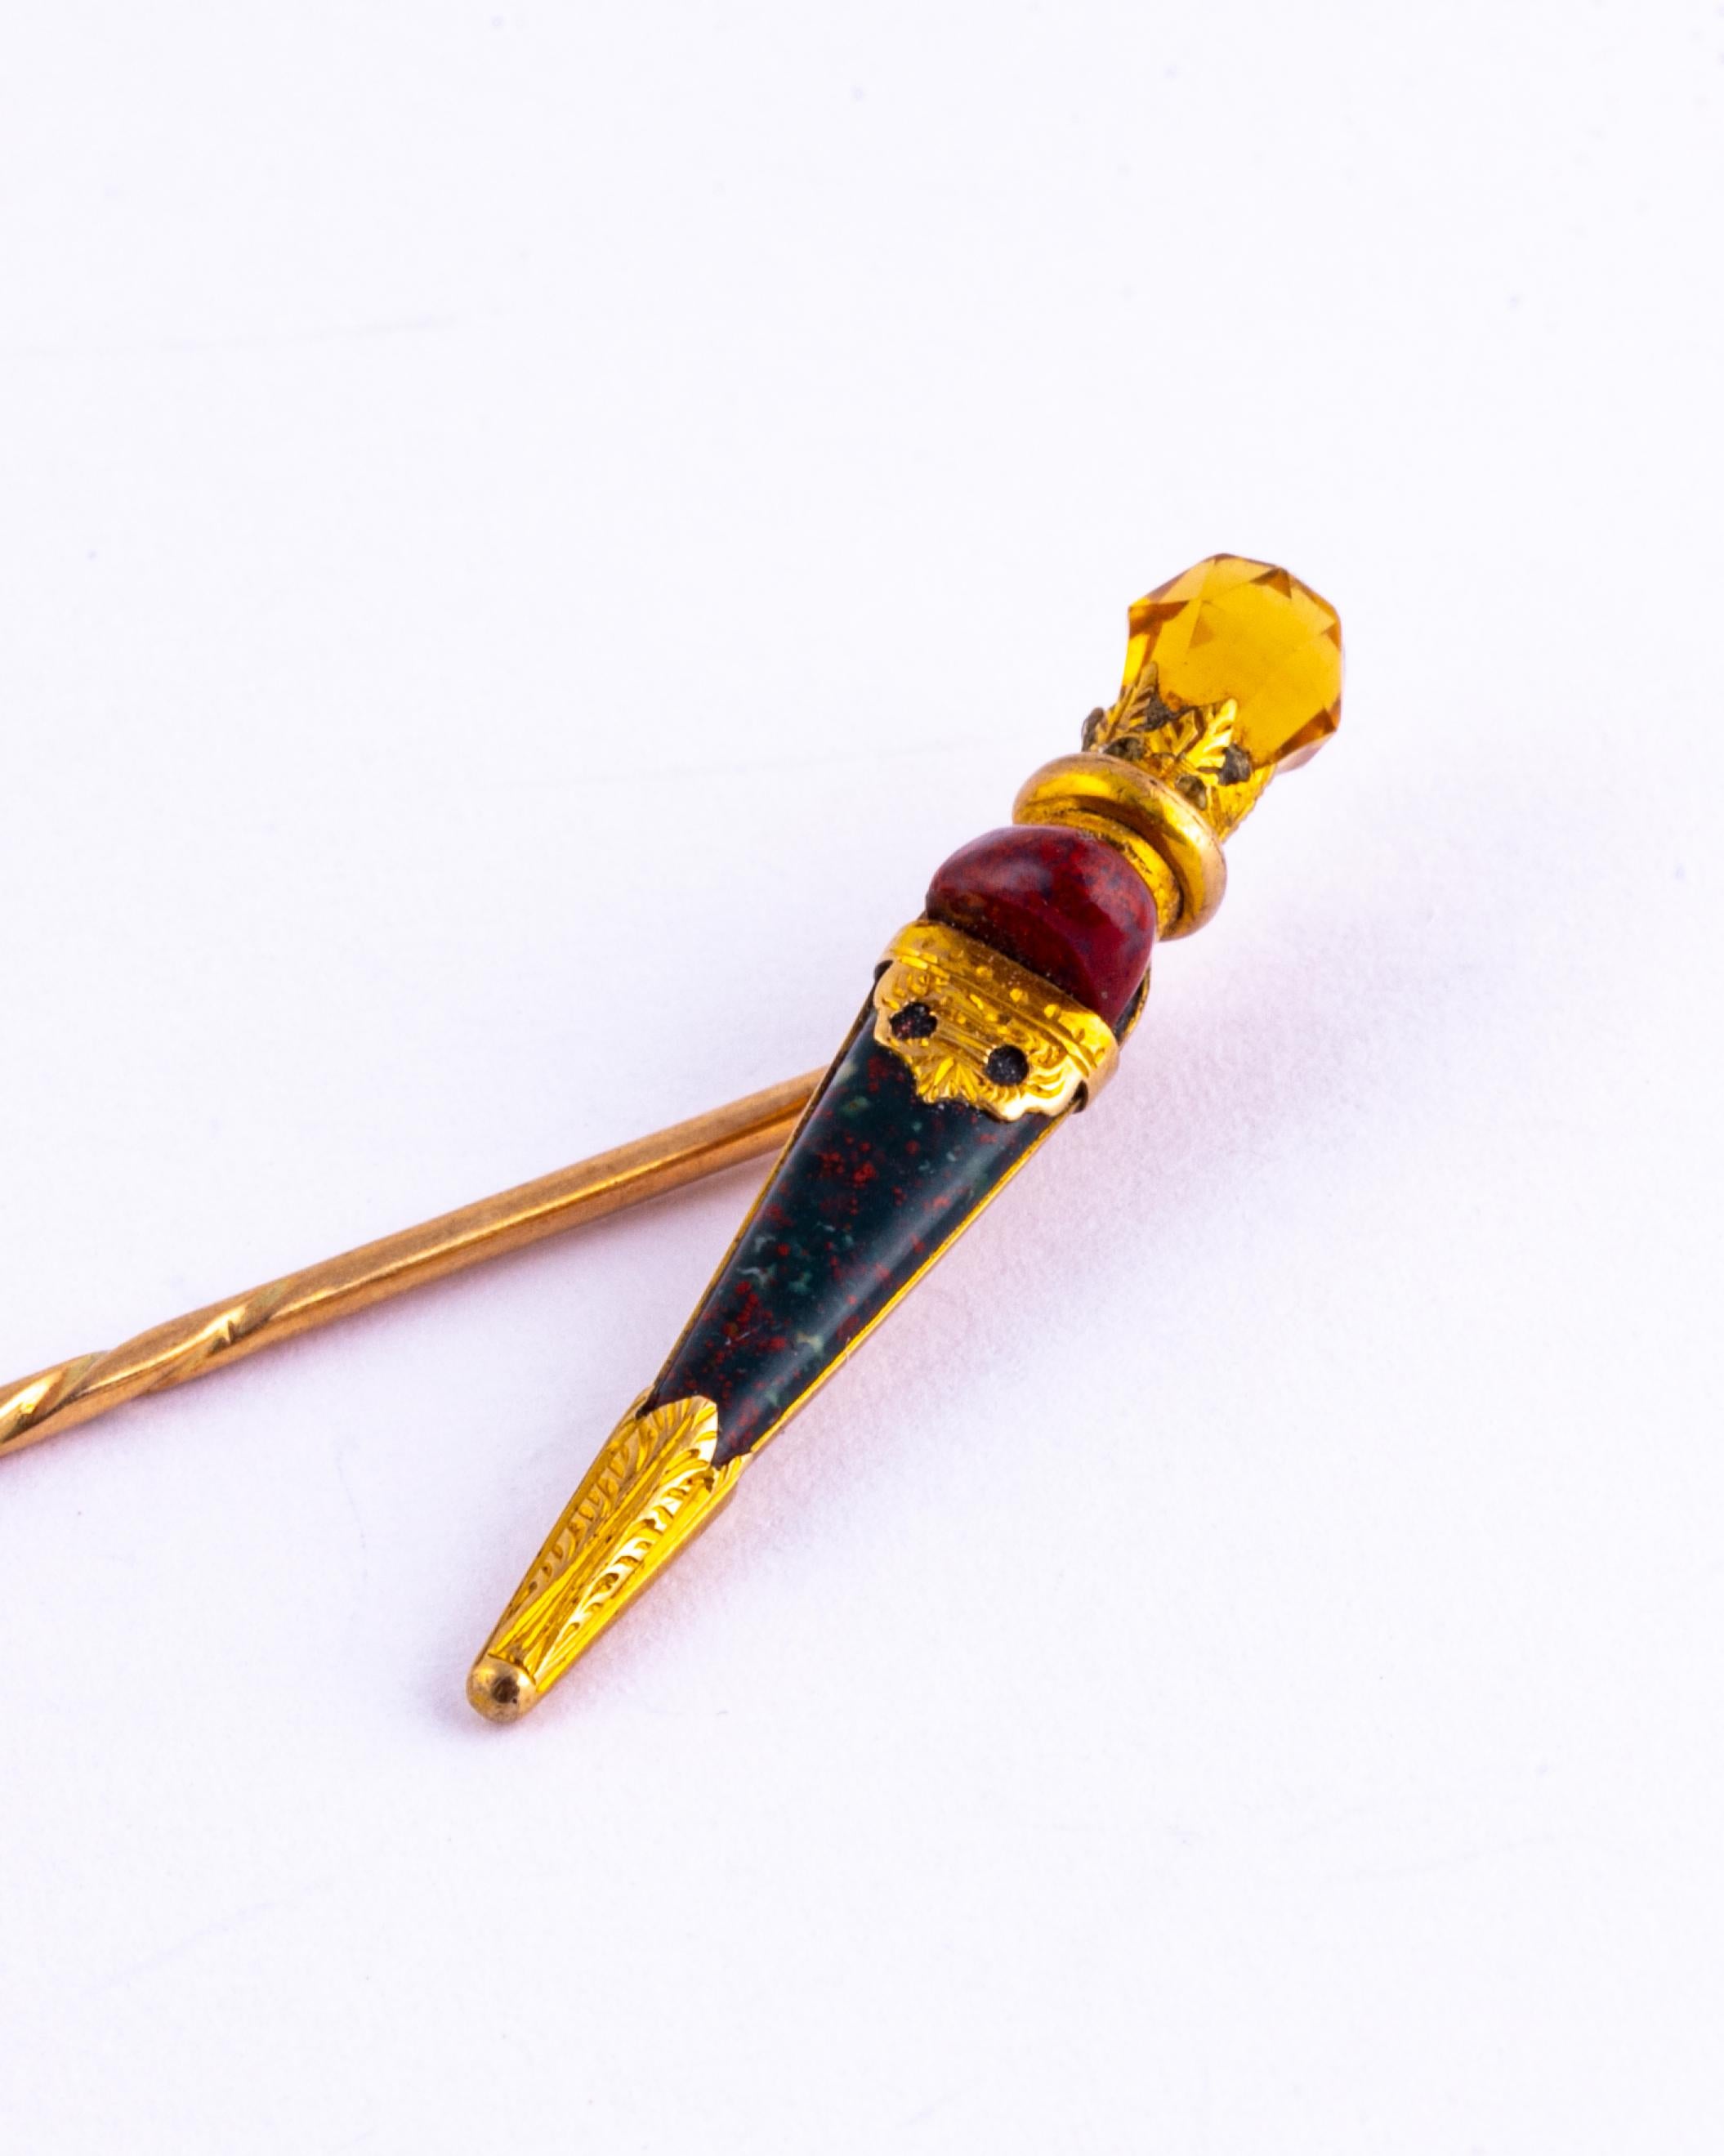 Delicate and beautifully detailed, this dirk pin has a citrine stone at the end and then follows down to a carnelian and bloodstone.   

Total Length: 7cm
Dirk Dimensions: 31x5mm

Weight: 2g